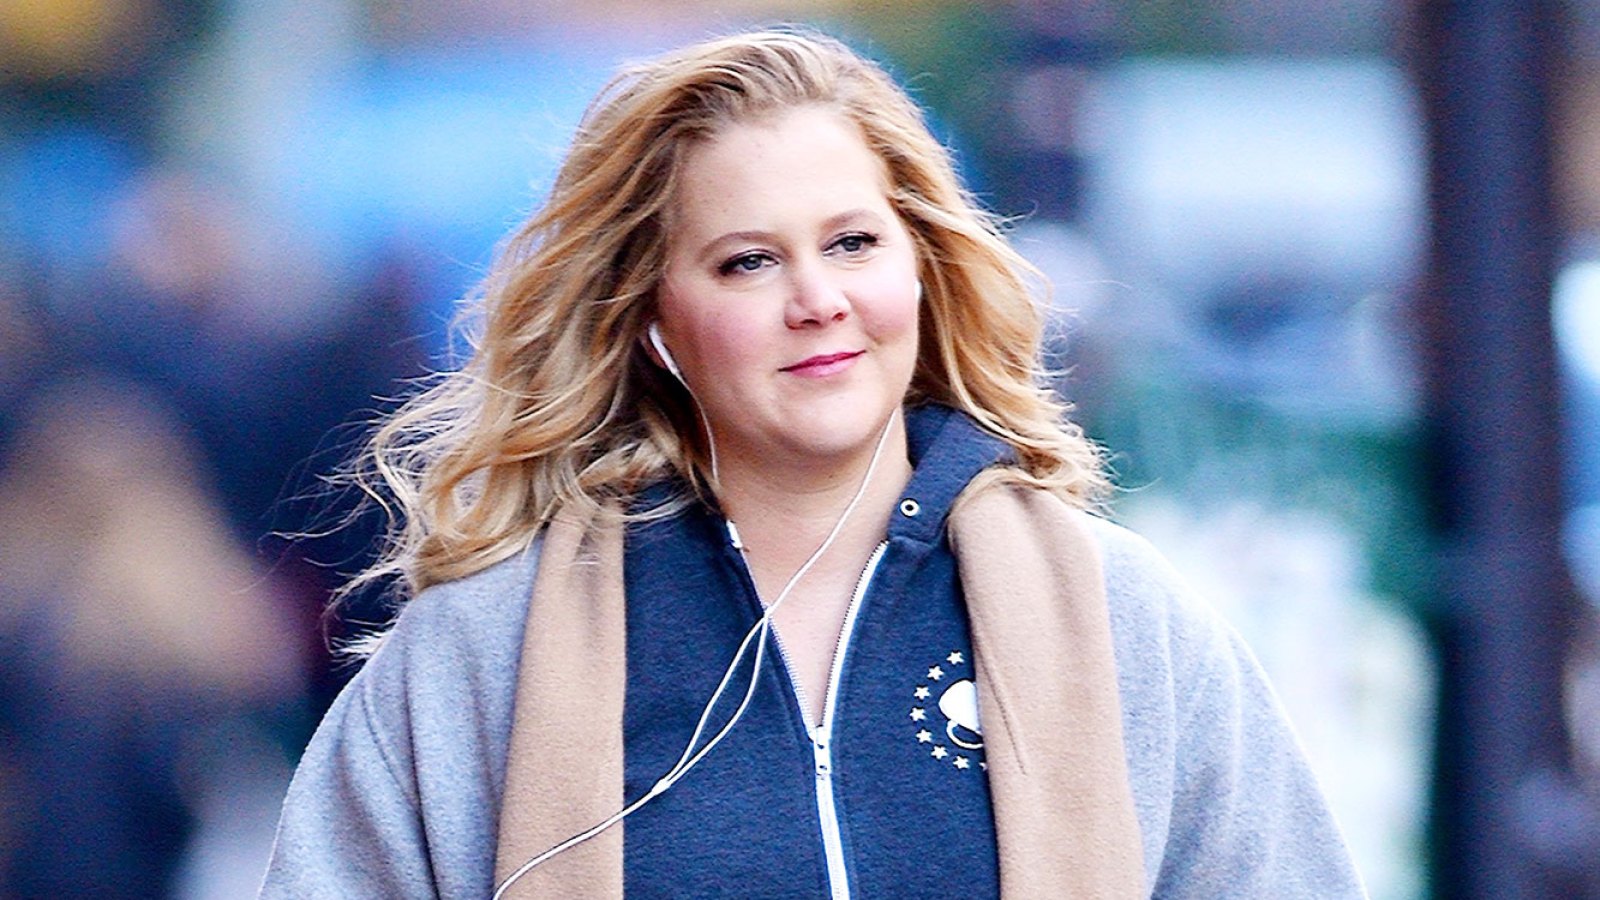 Amy Schumer Jokingly Compares Her Baby Shower to Fyre Festival